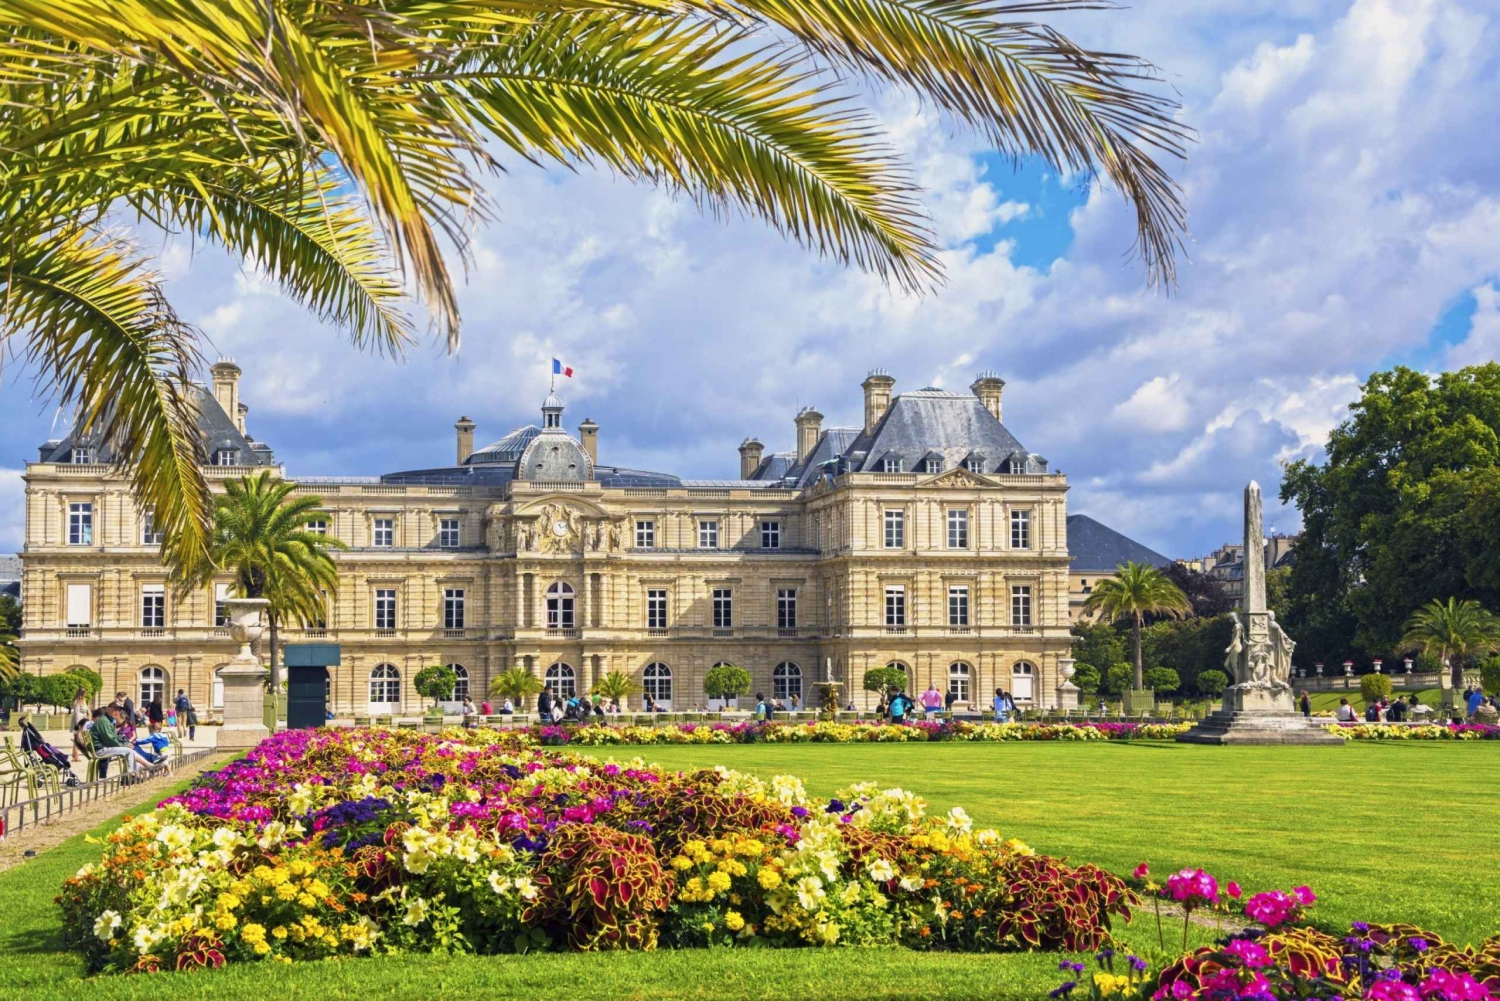 Take-a-Romantic-Stroll-in-Luxembourg-Gardens